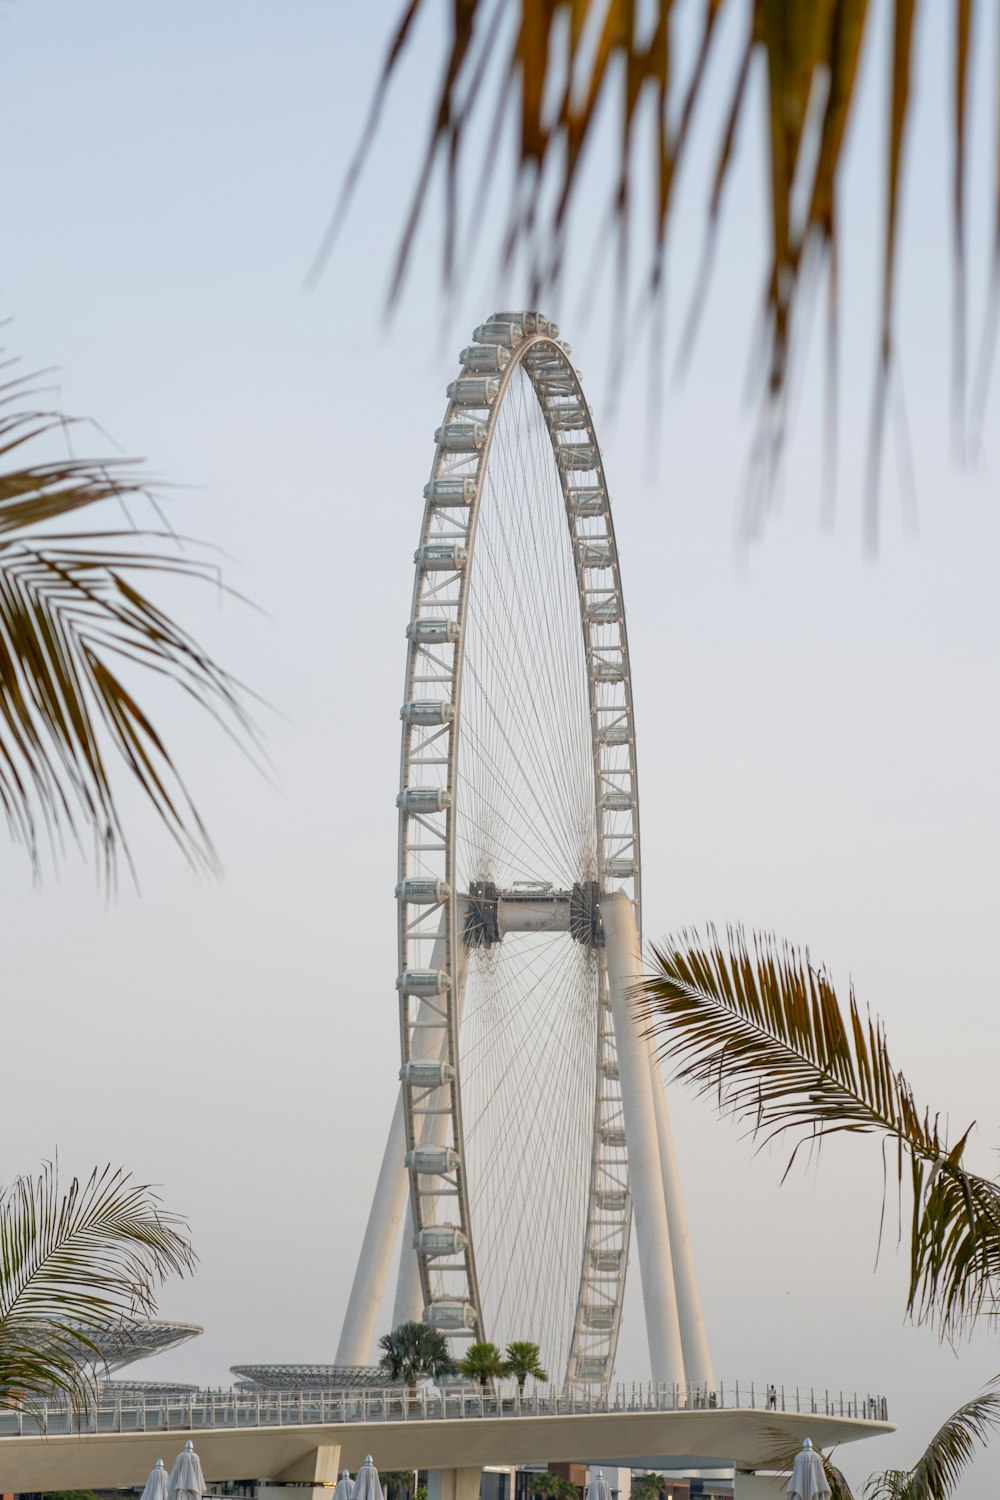 a large ferris wheel sitting next to a palm tree